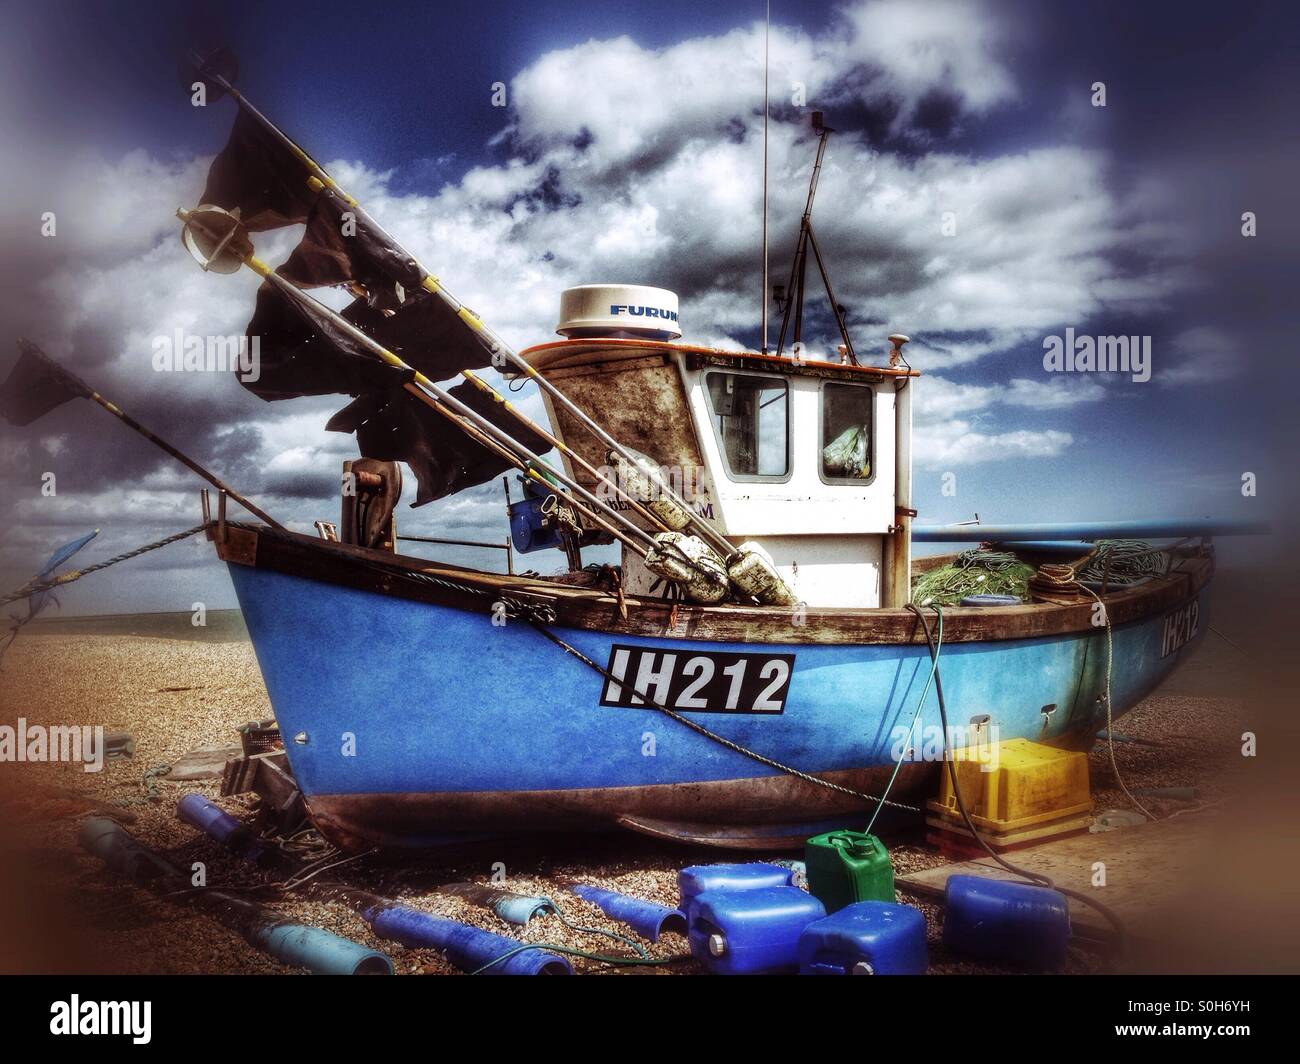 Fishing boat on the beach at Aldeburgh, Suffolk, England. Stock Photo